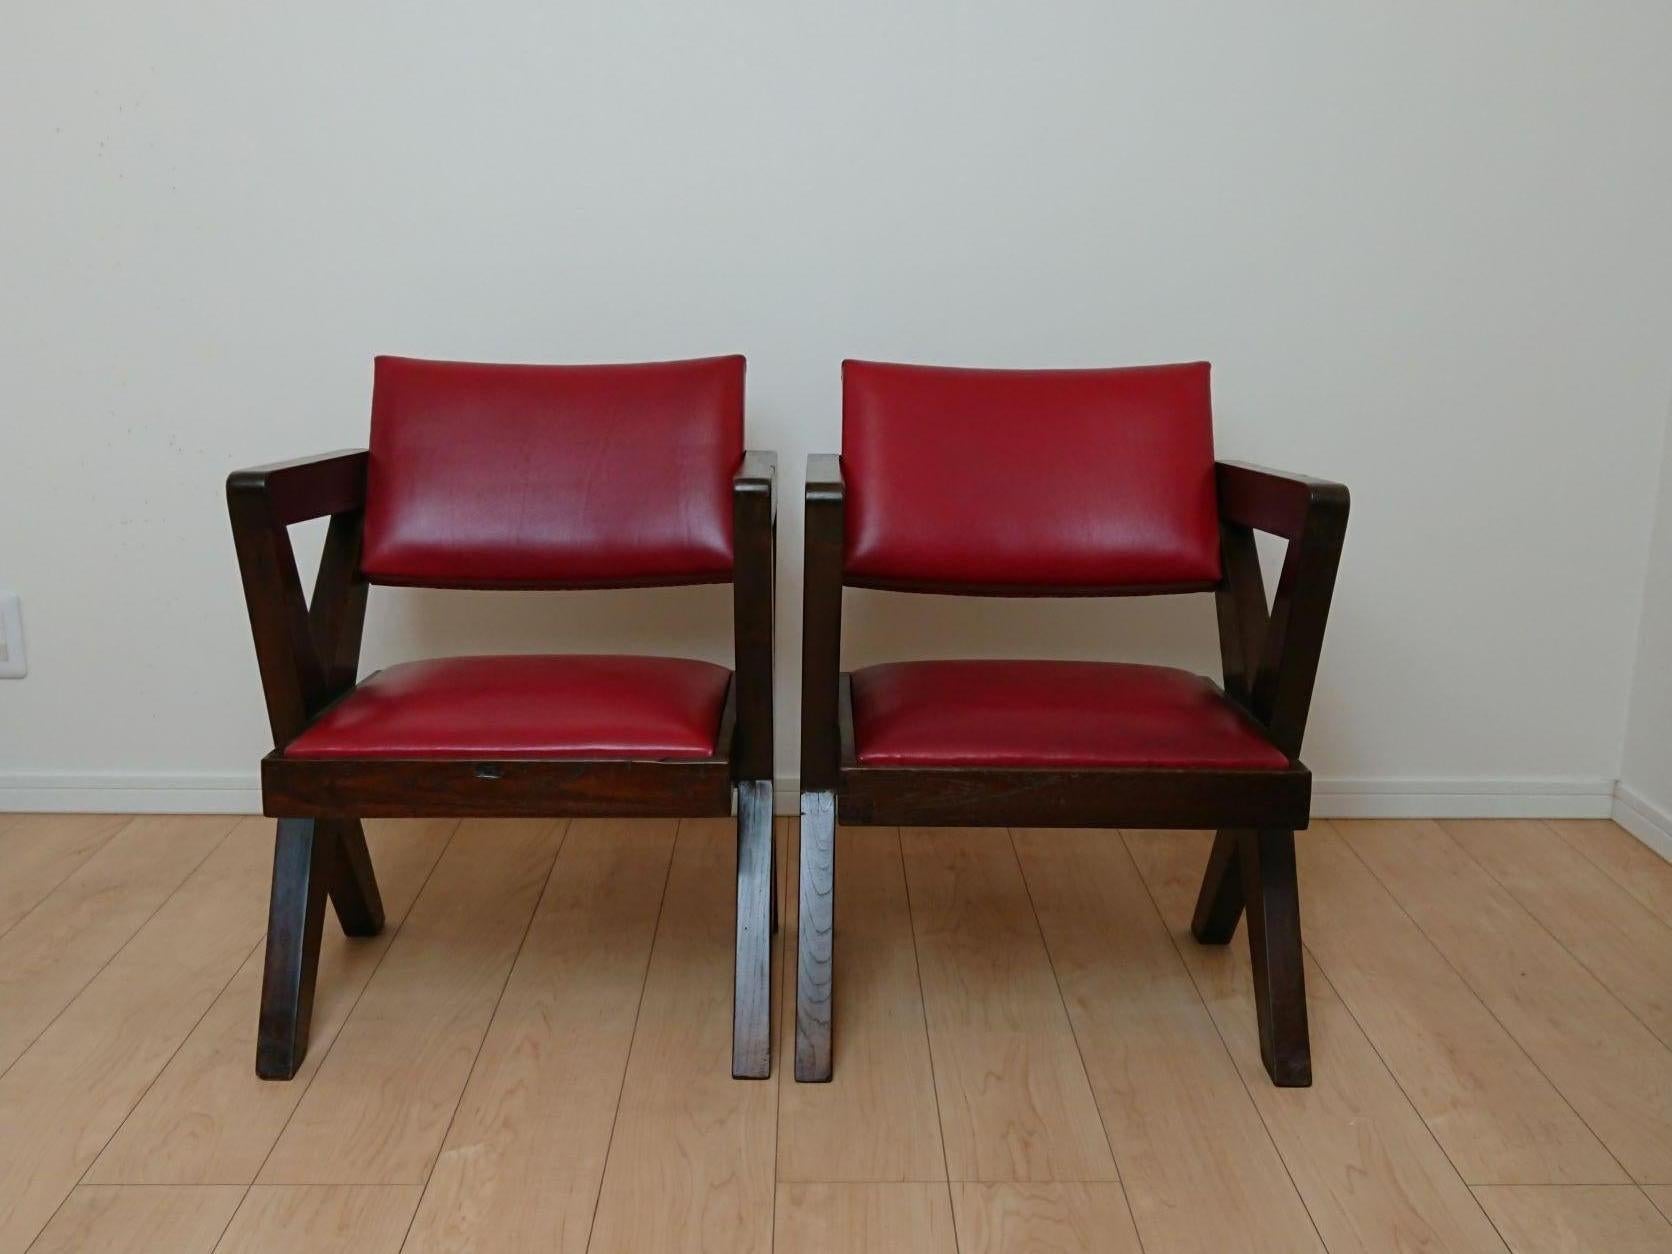 Cross legs pair of armchairs designed Pierre Jeanneret for Chandigarh city, India. 
Solid teak wood and upholstered real leather rouge are in good original condition.
Good wear consistent with age and use.